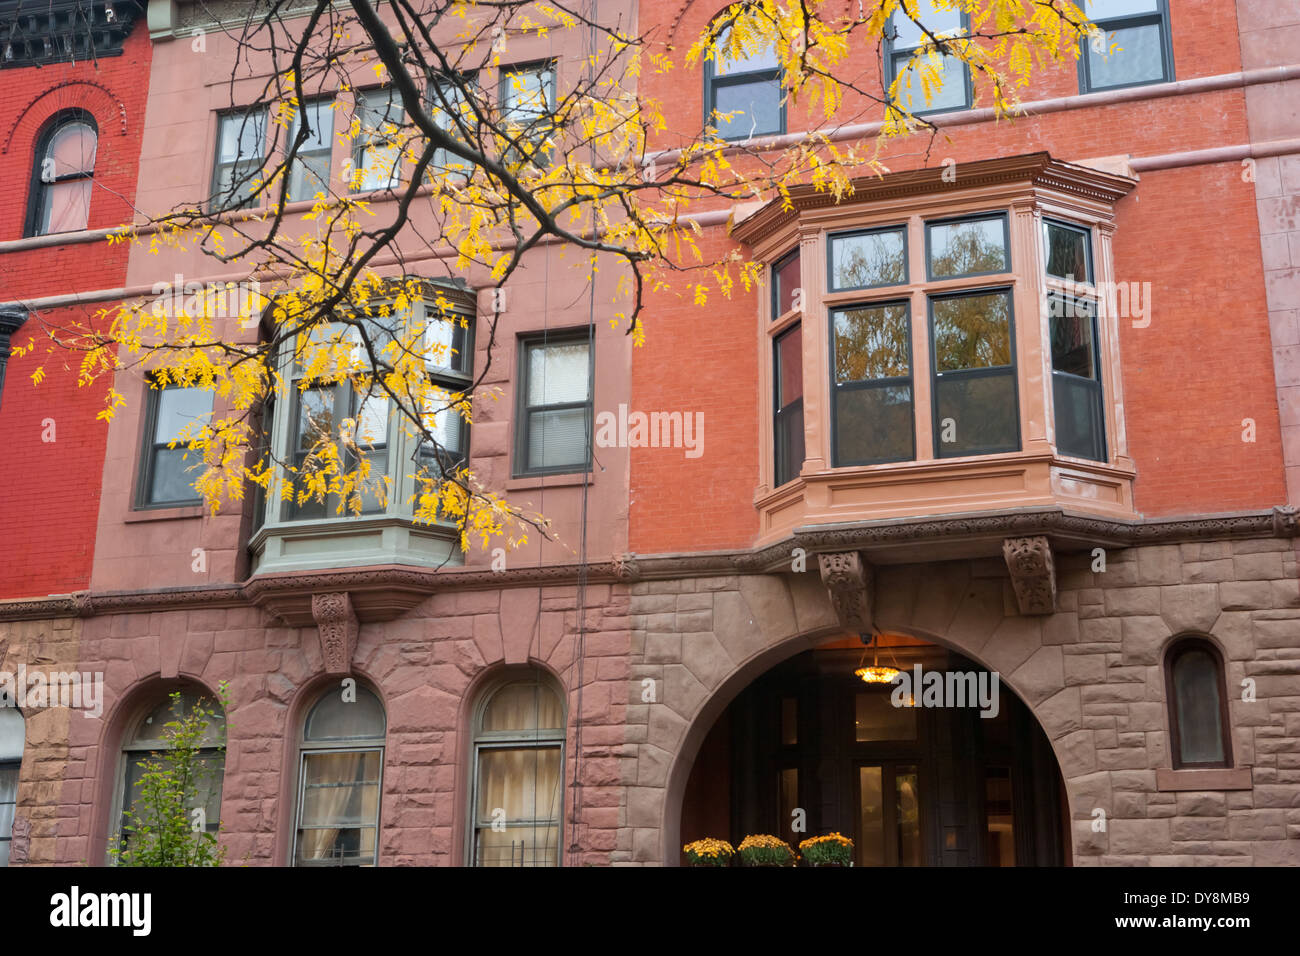 Harlem Row Houses in the Mount Morris Park Historic District, Autumn, New York, USA Stock Photo